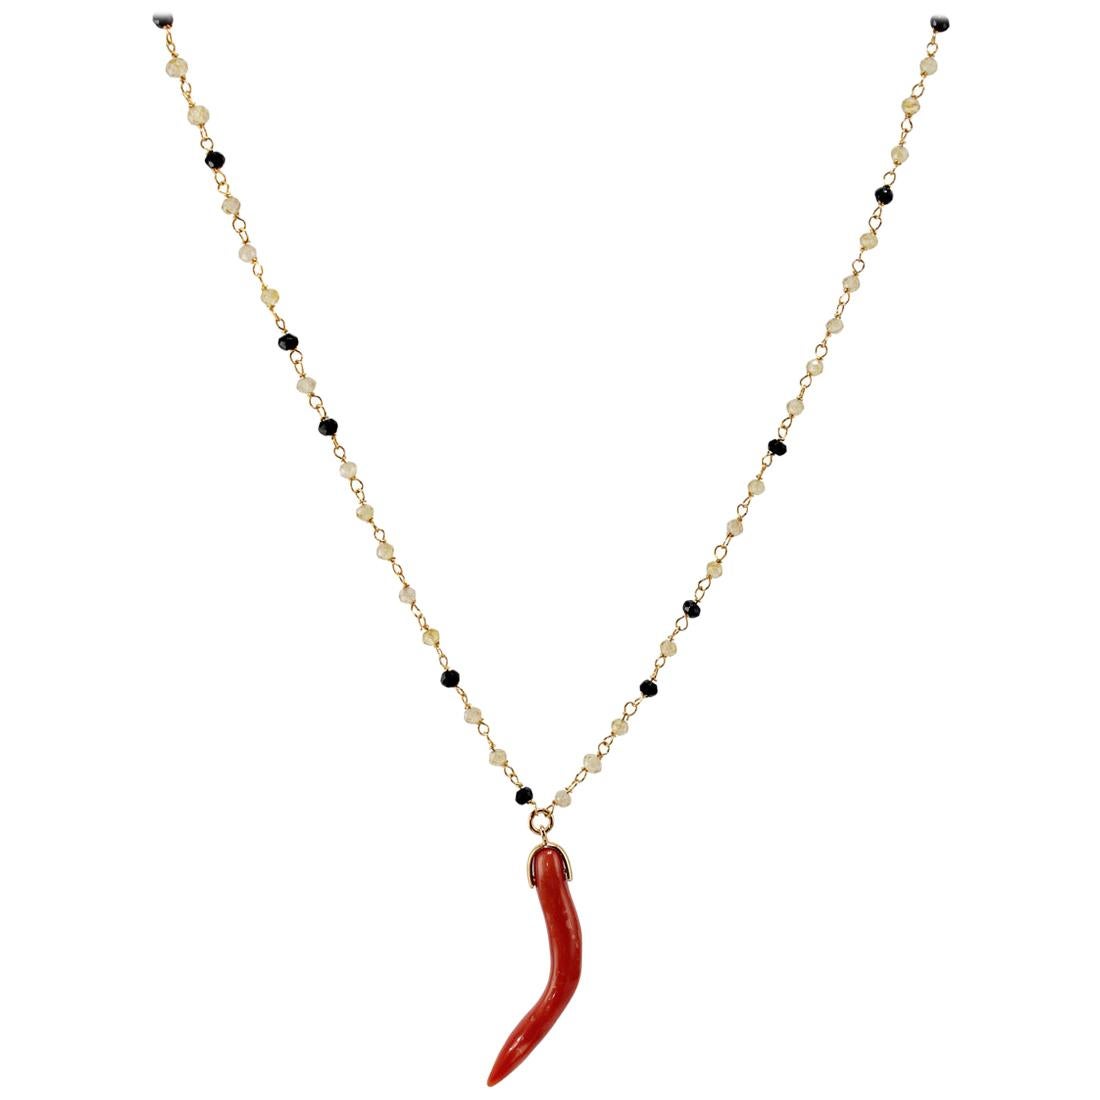 Pendant Necklace in Red Coral, Natural Zircons, Black Spinel and 18 Karat Gold For Sale